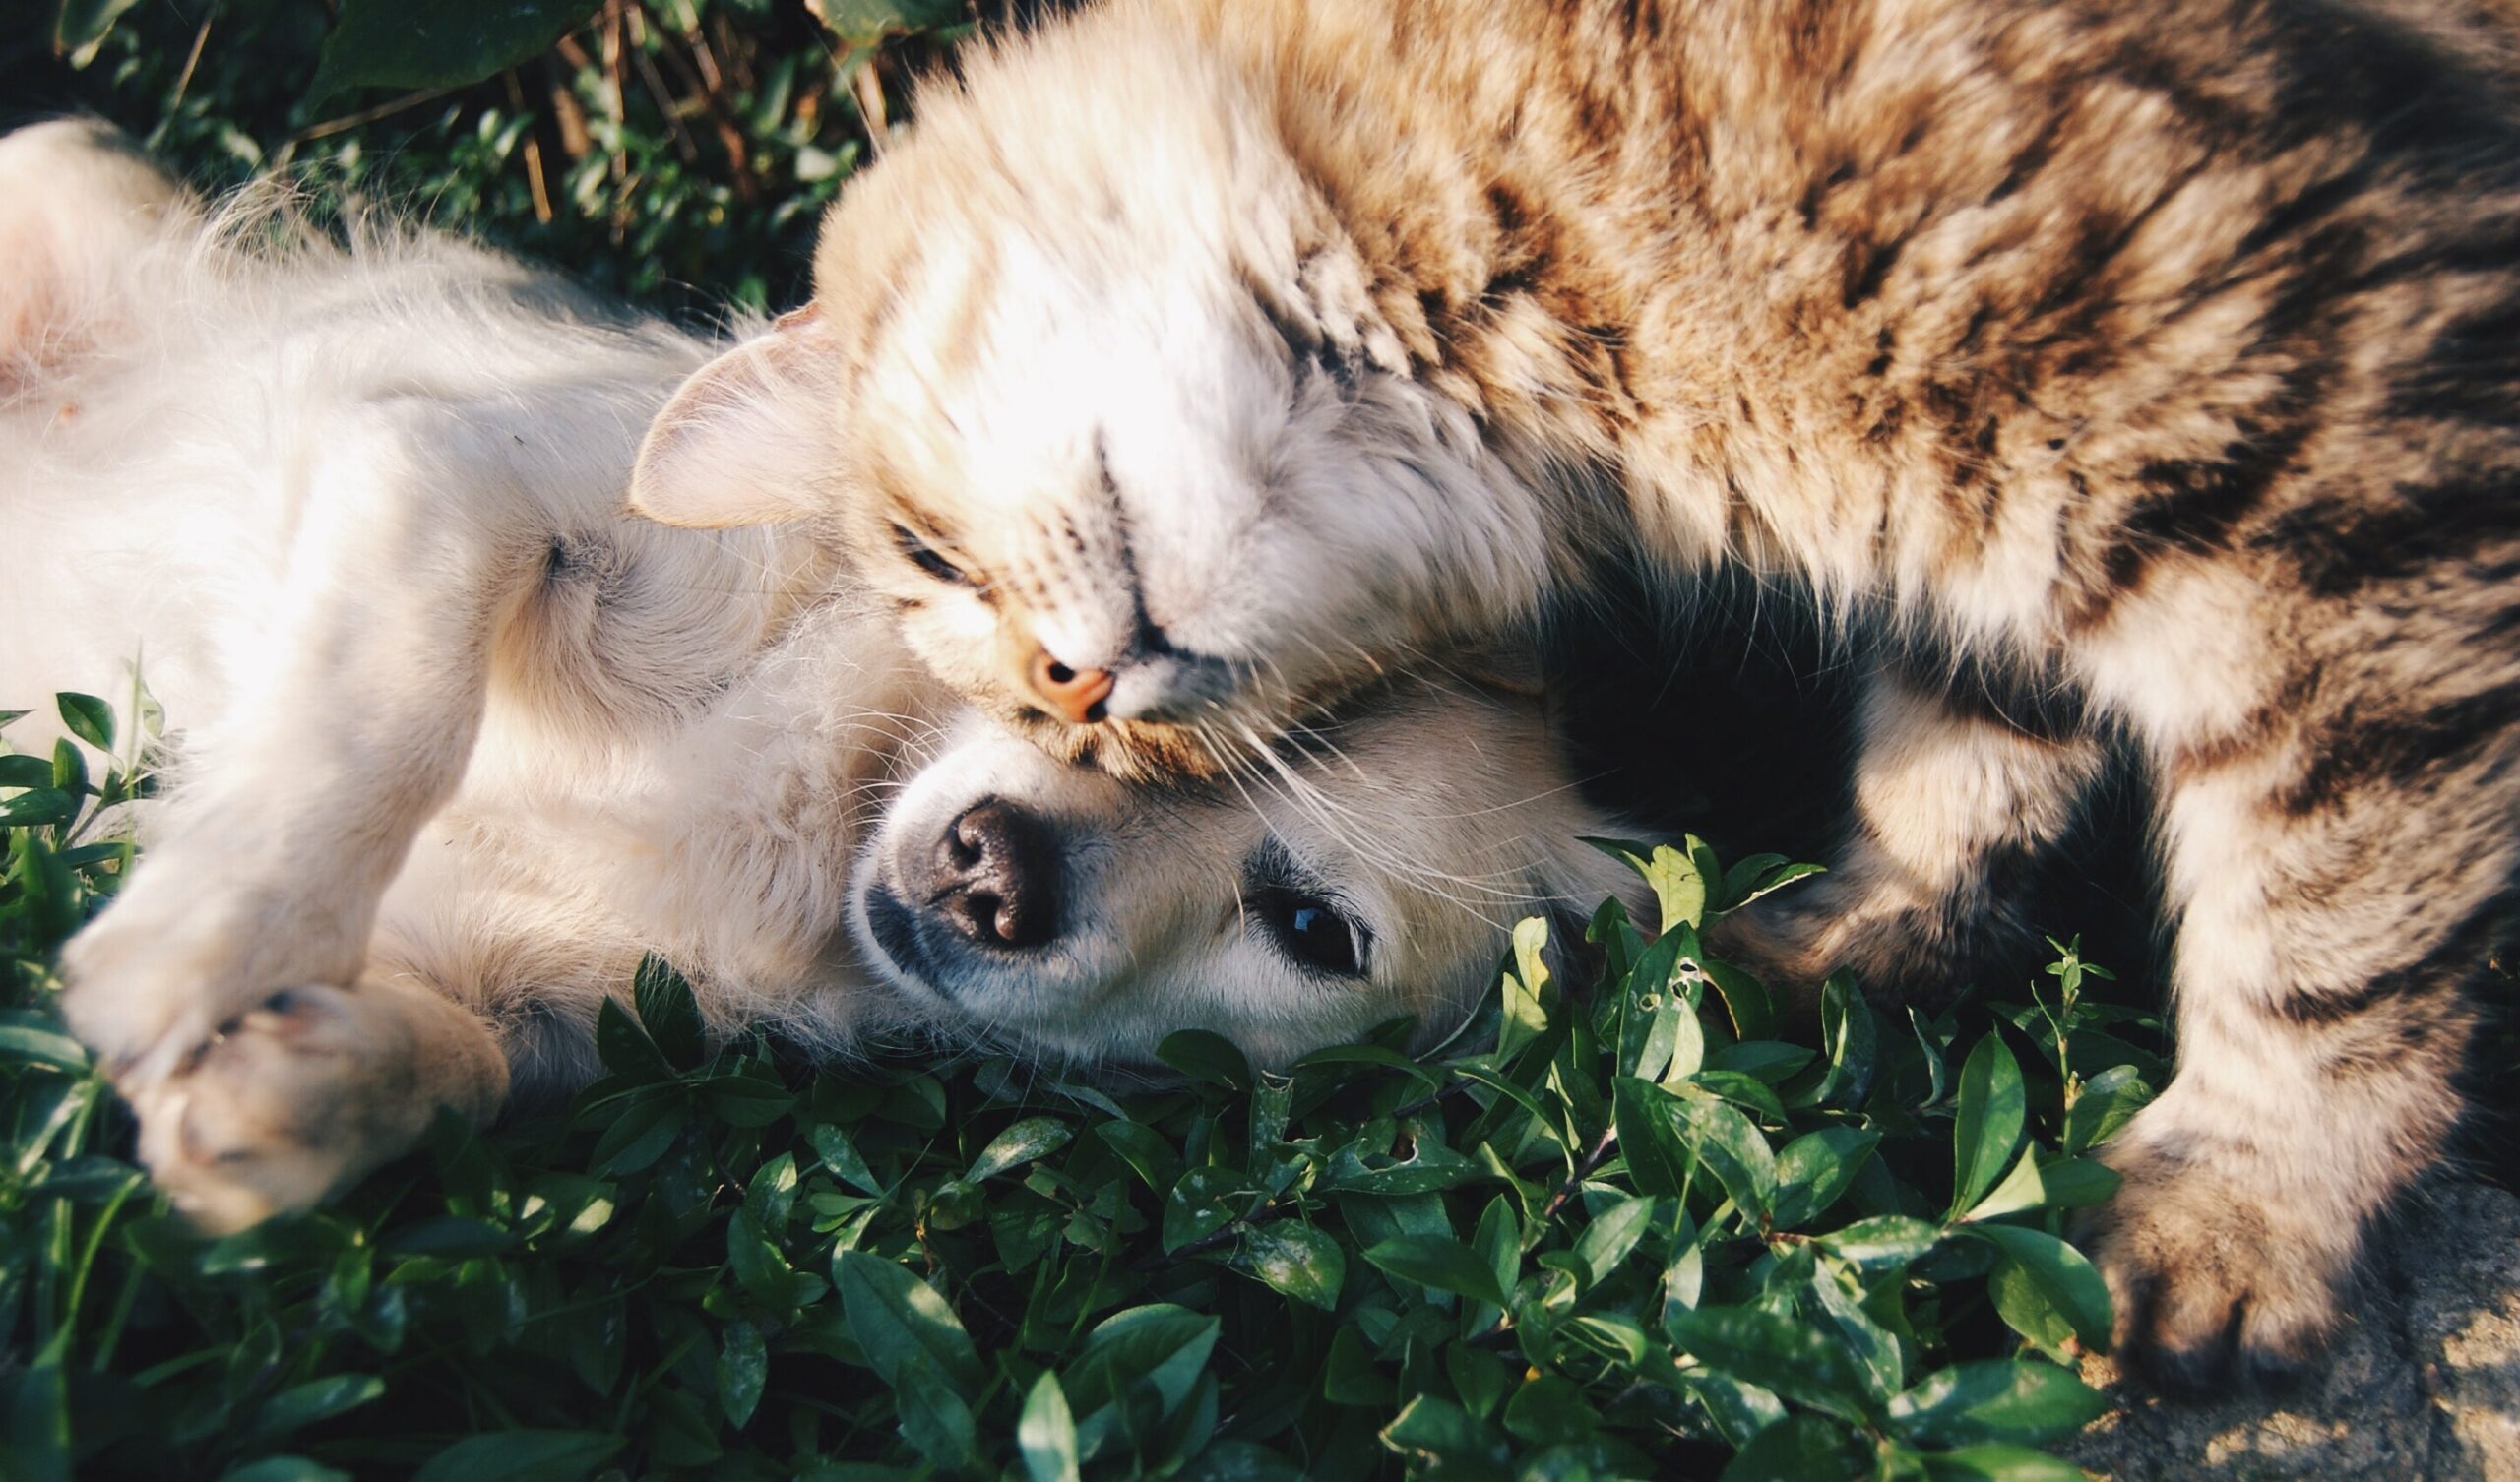 A photo of a cat lining into a dog, both look very young.